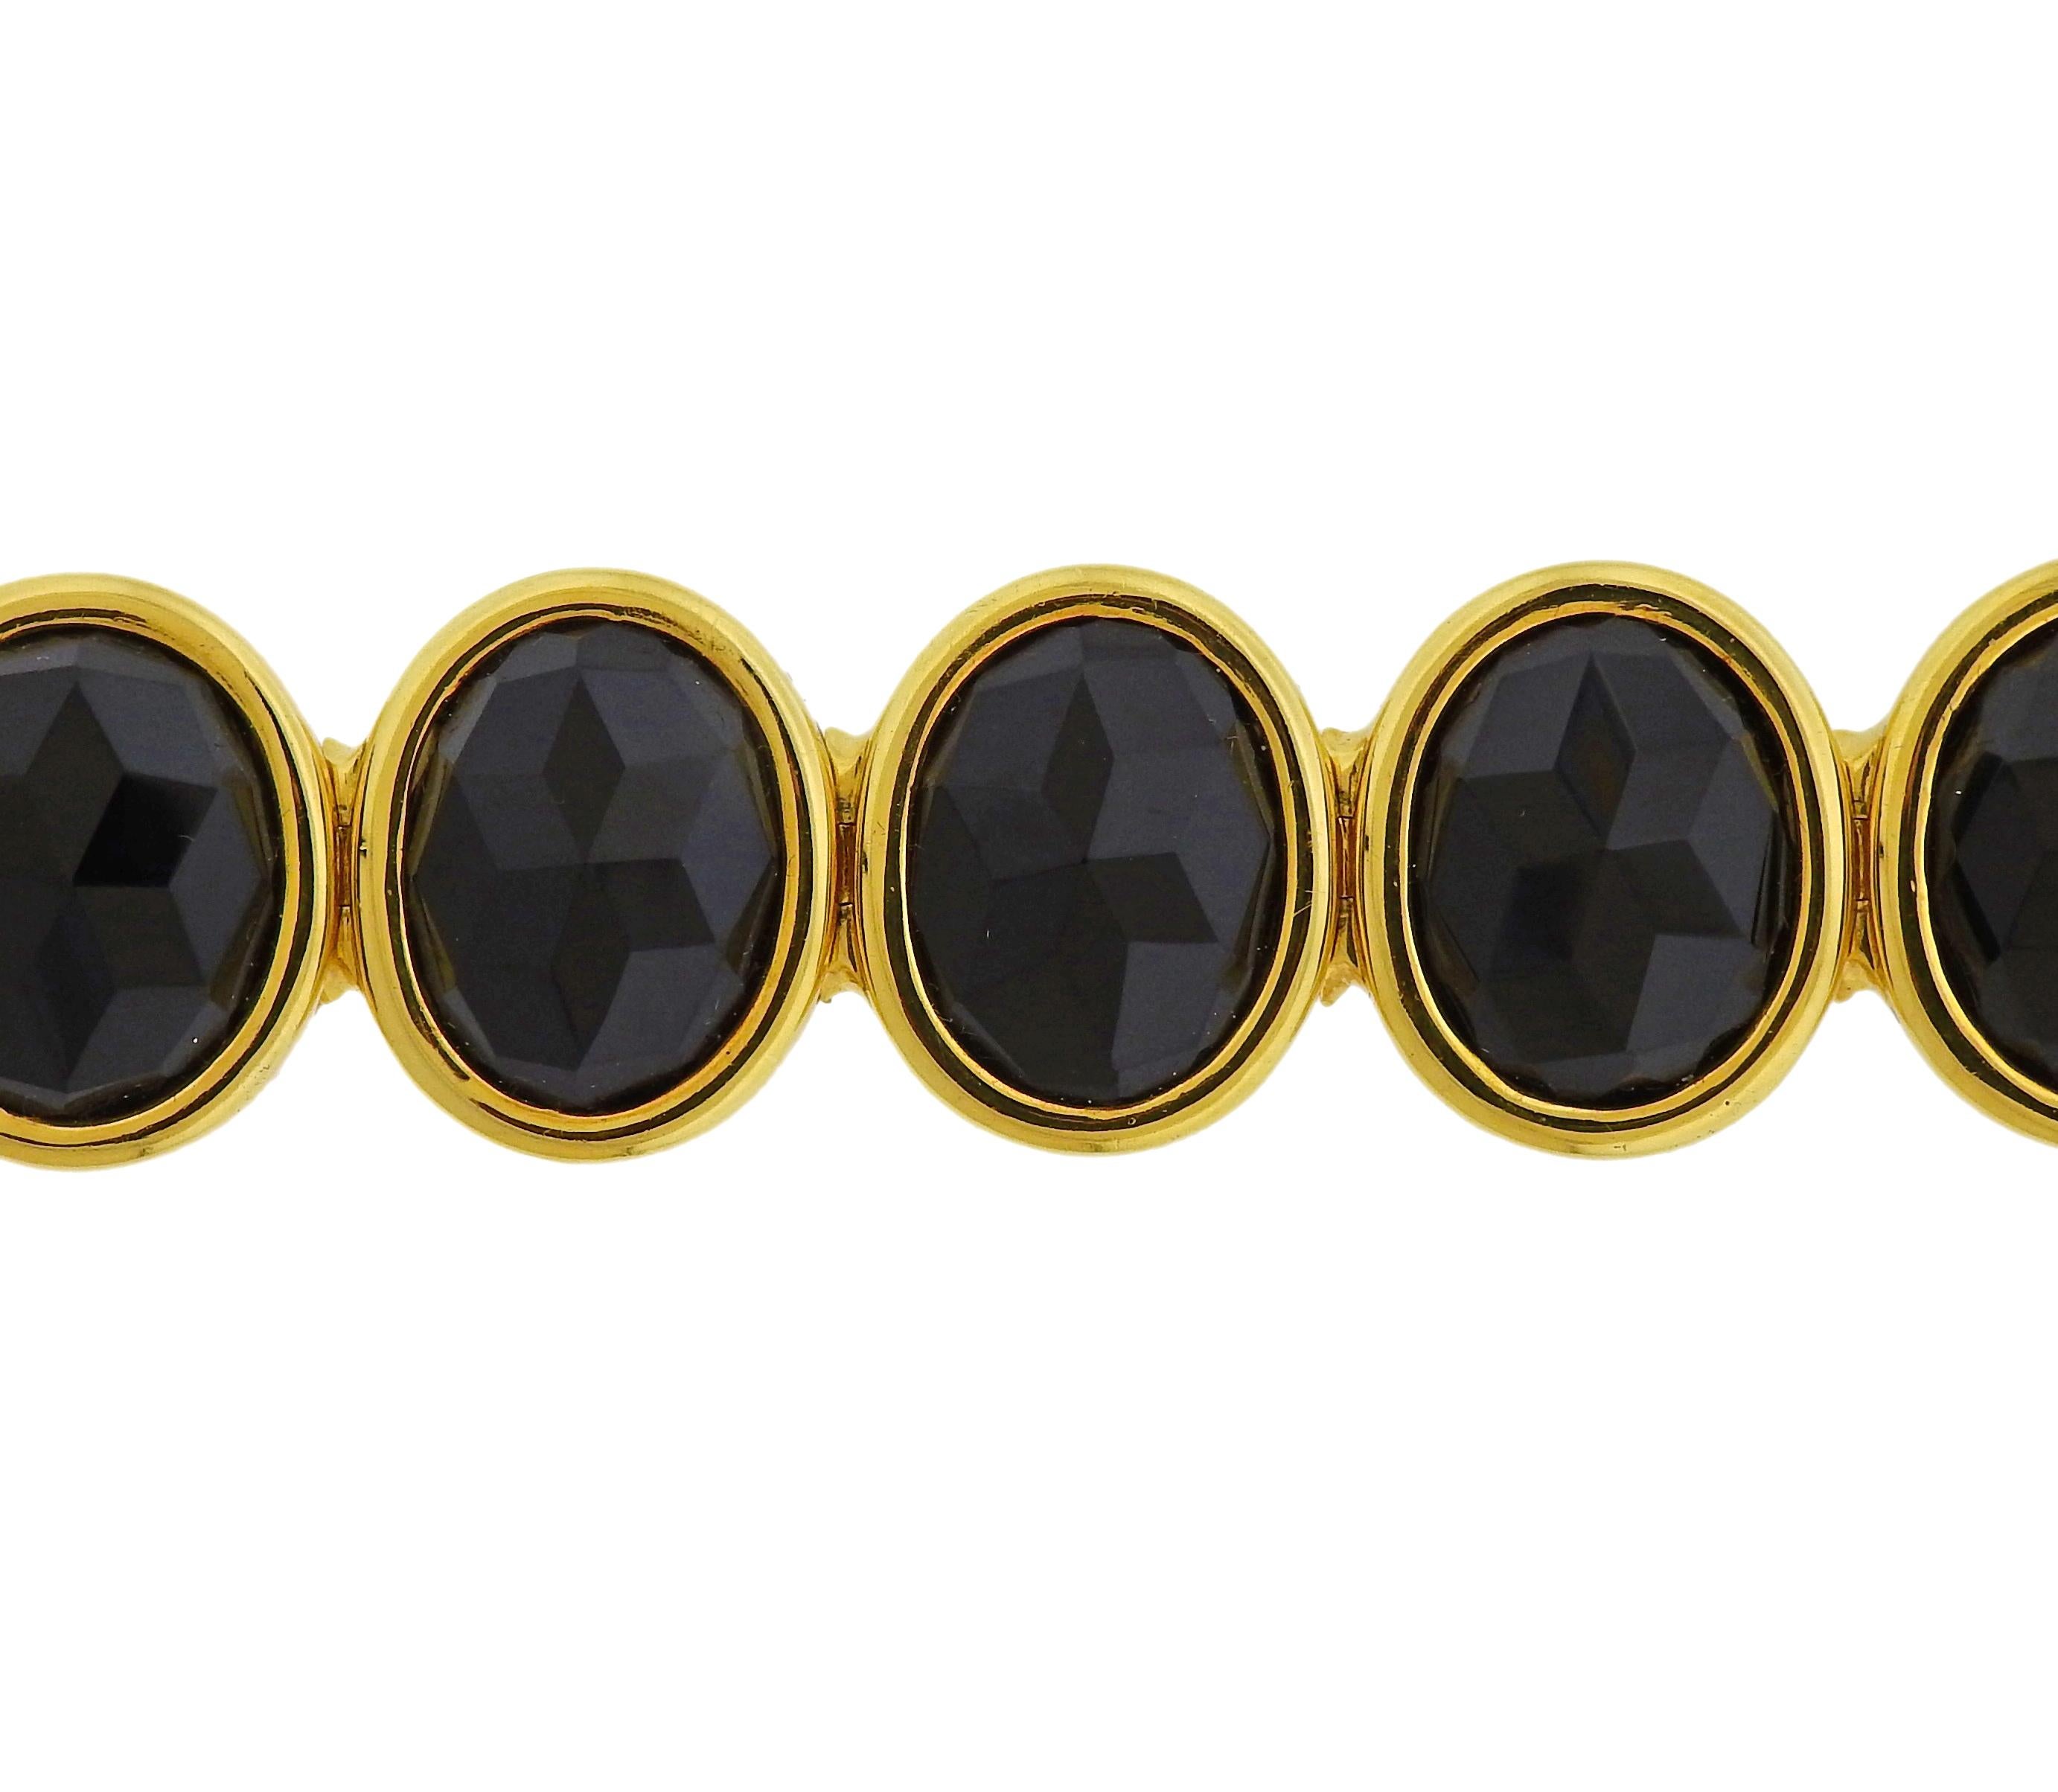 Italian 18k yellow gold oval link bracelet with faceted onyx gemstones. Length of the bracelet is 7